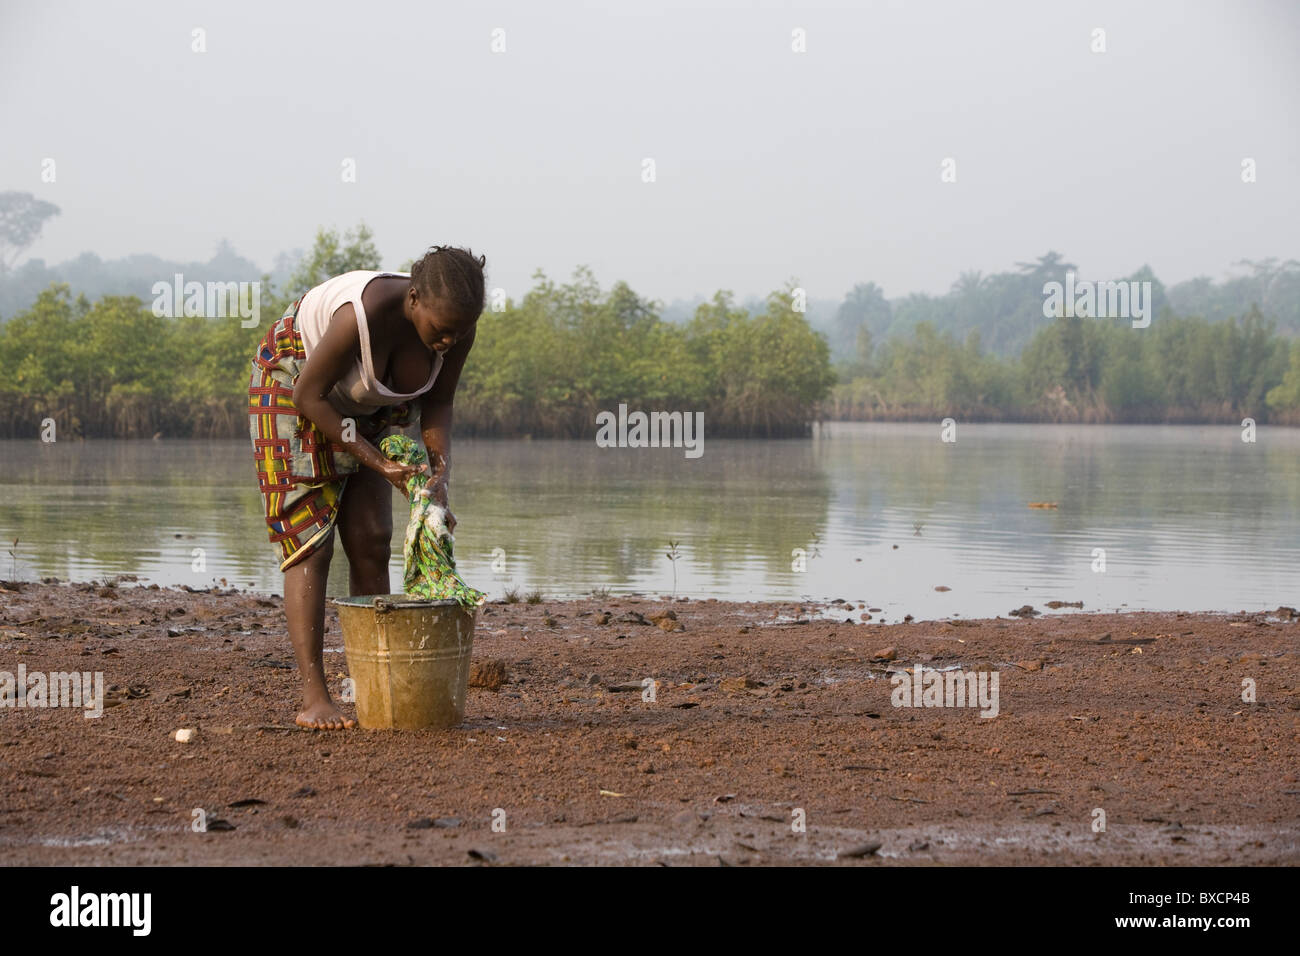 A woman washes clothes in the Sierra Leone River, which runs through the town of Port Loko, Sierra Leone, West Africa. Stock Photo